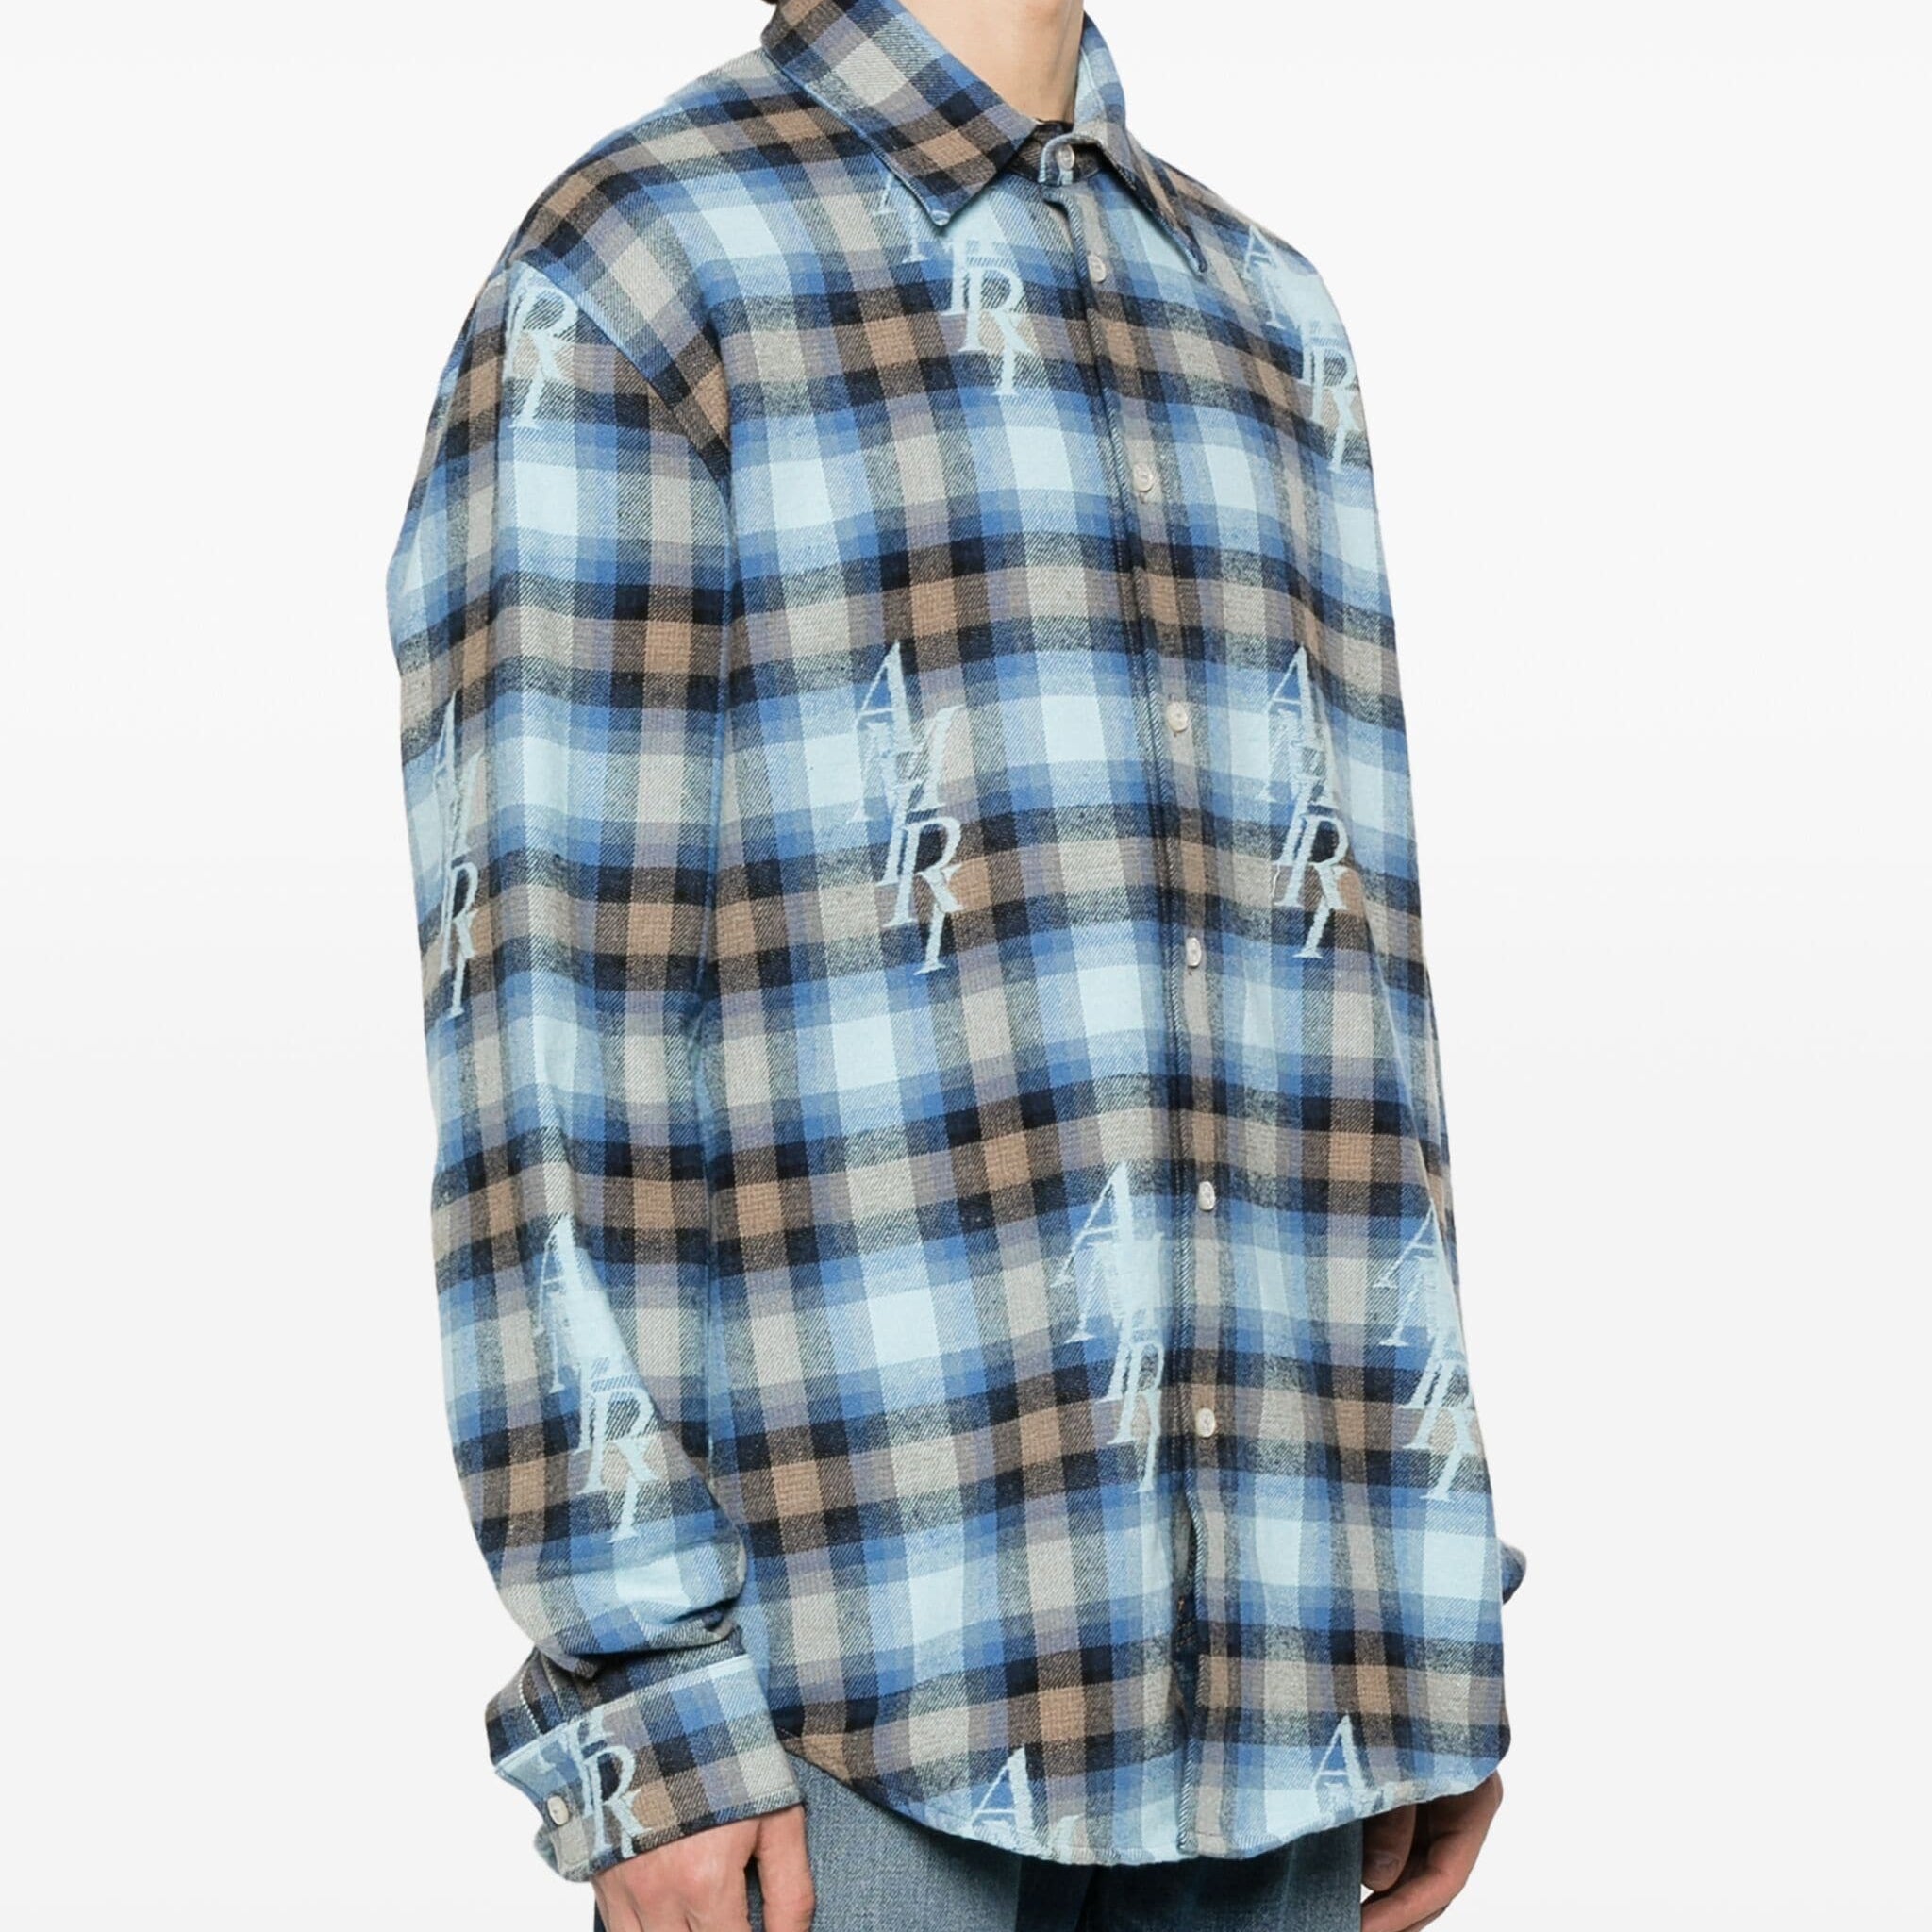 STAGGERED PLAID FLANNEL